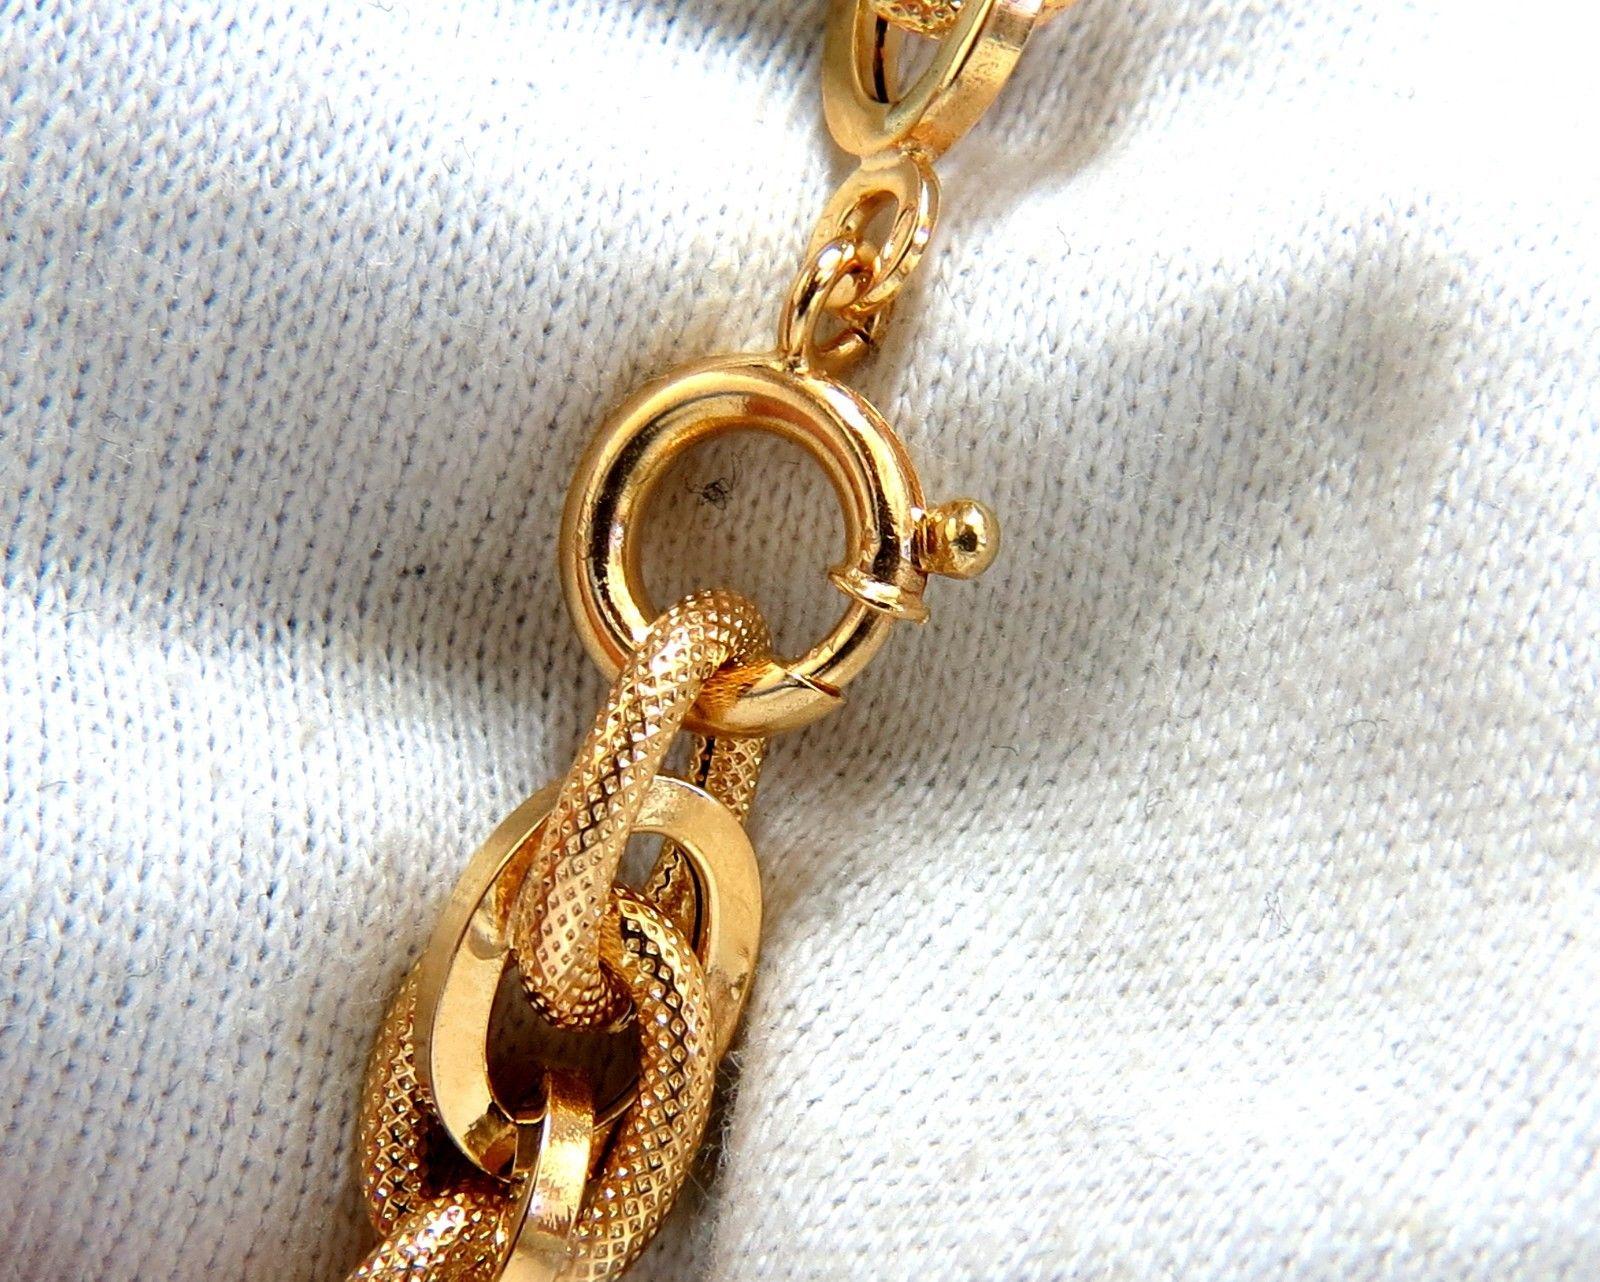 Tri-Linked, Durable chain Bracelet

Smooth & Staggared Finished

8 inch / wearable length

18.3 Grams.

10mm wide links

18kt yellow Gold.

Secure & wide clasp